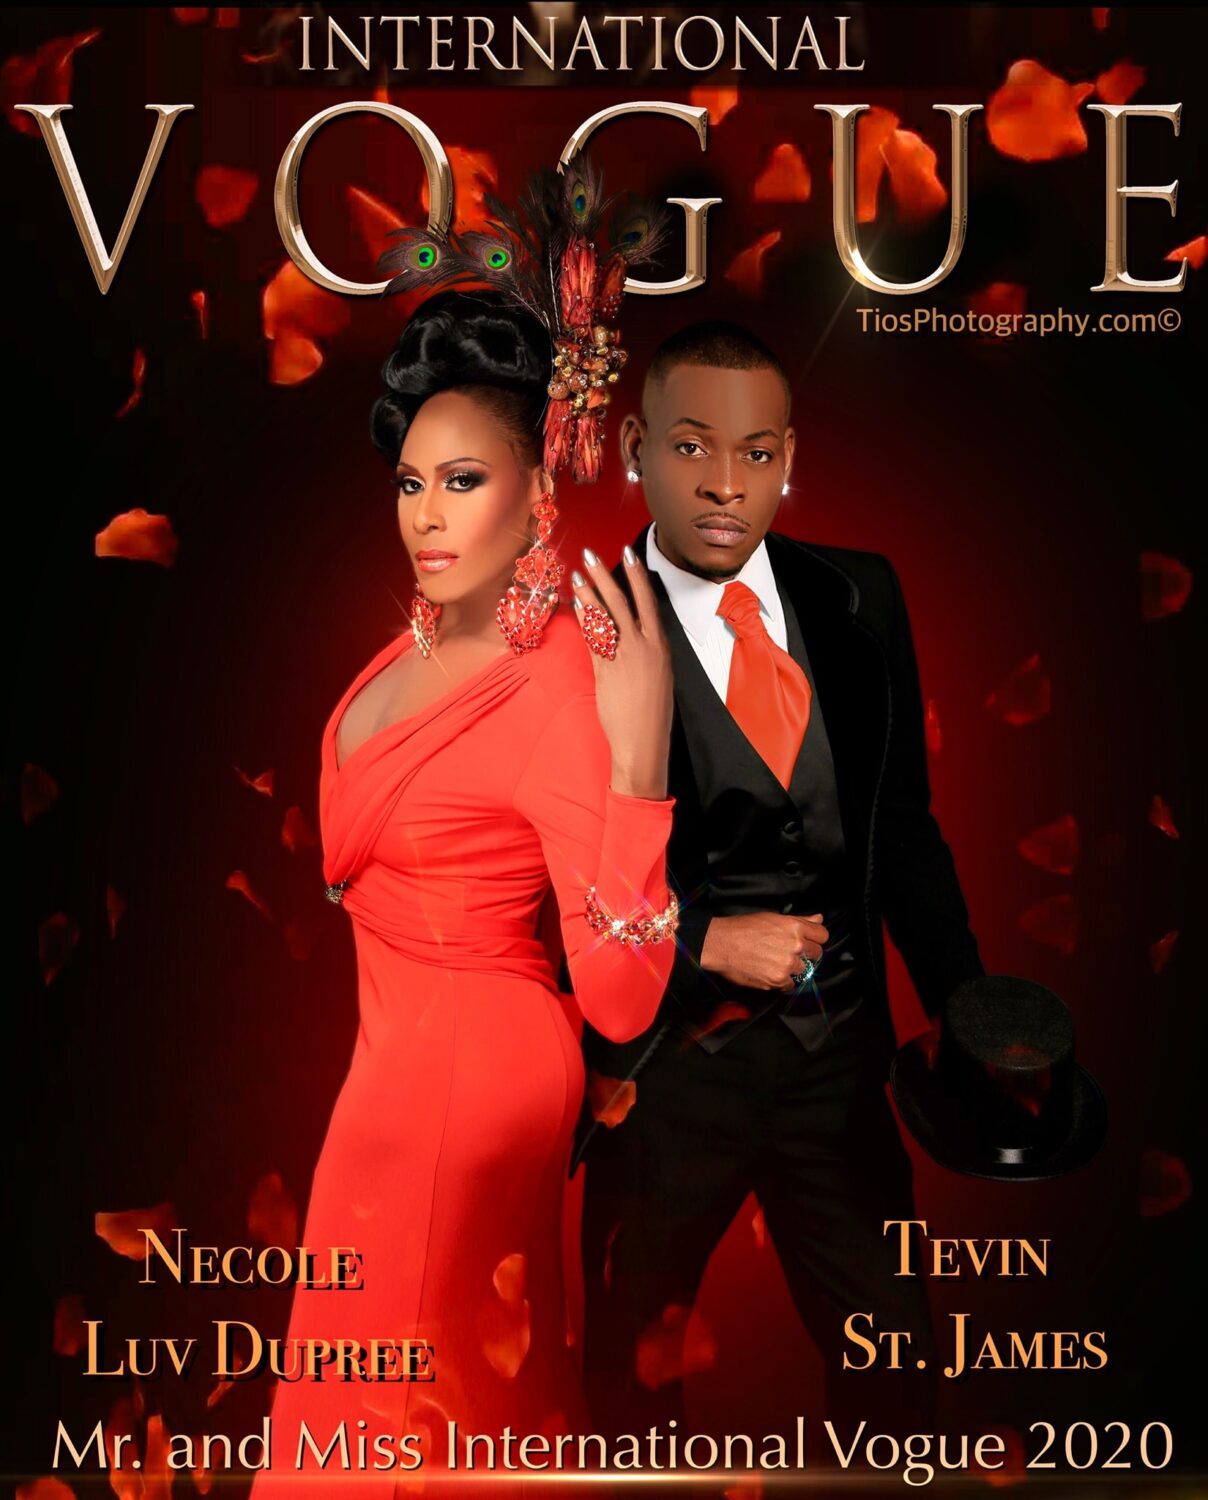 Necole Luv Dupree and Tevin St. James | Promotional Photos for Mr. and Miss International Vogue 2020